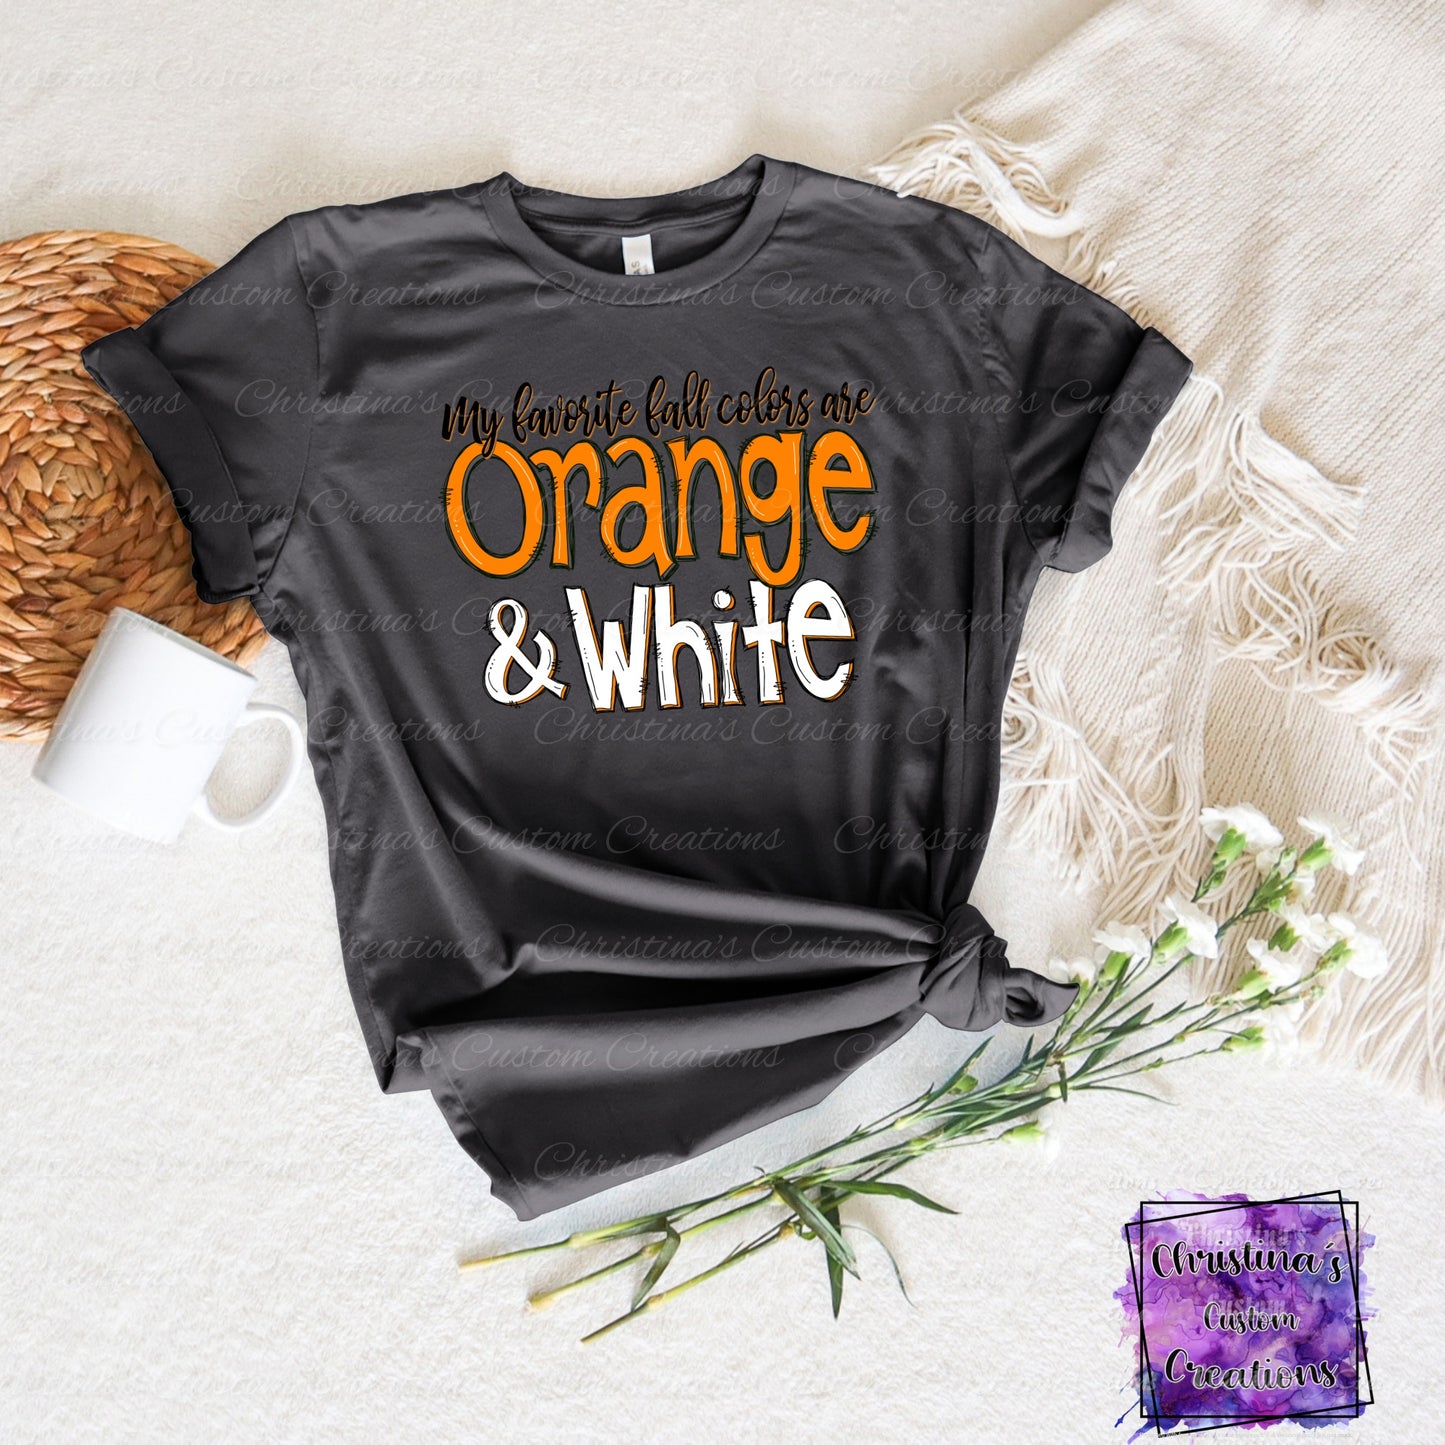 My Favorite Fall Colors Are Orange And White T-Shirt | Trendy School Spirit Shirt | Fast Shipping | Super Soft Shirts for Men/Women/Kid's | Bella Canvas